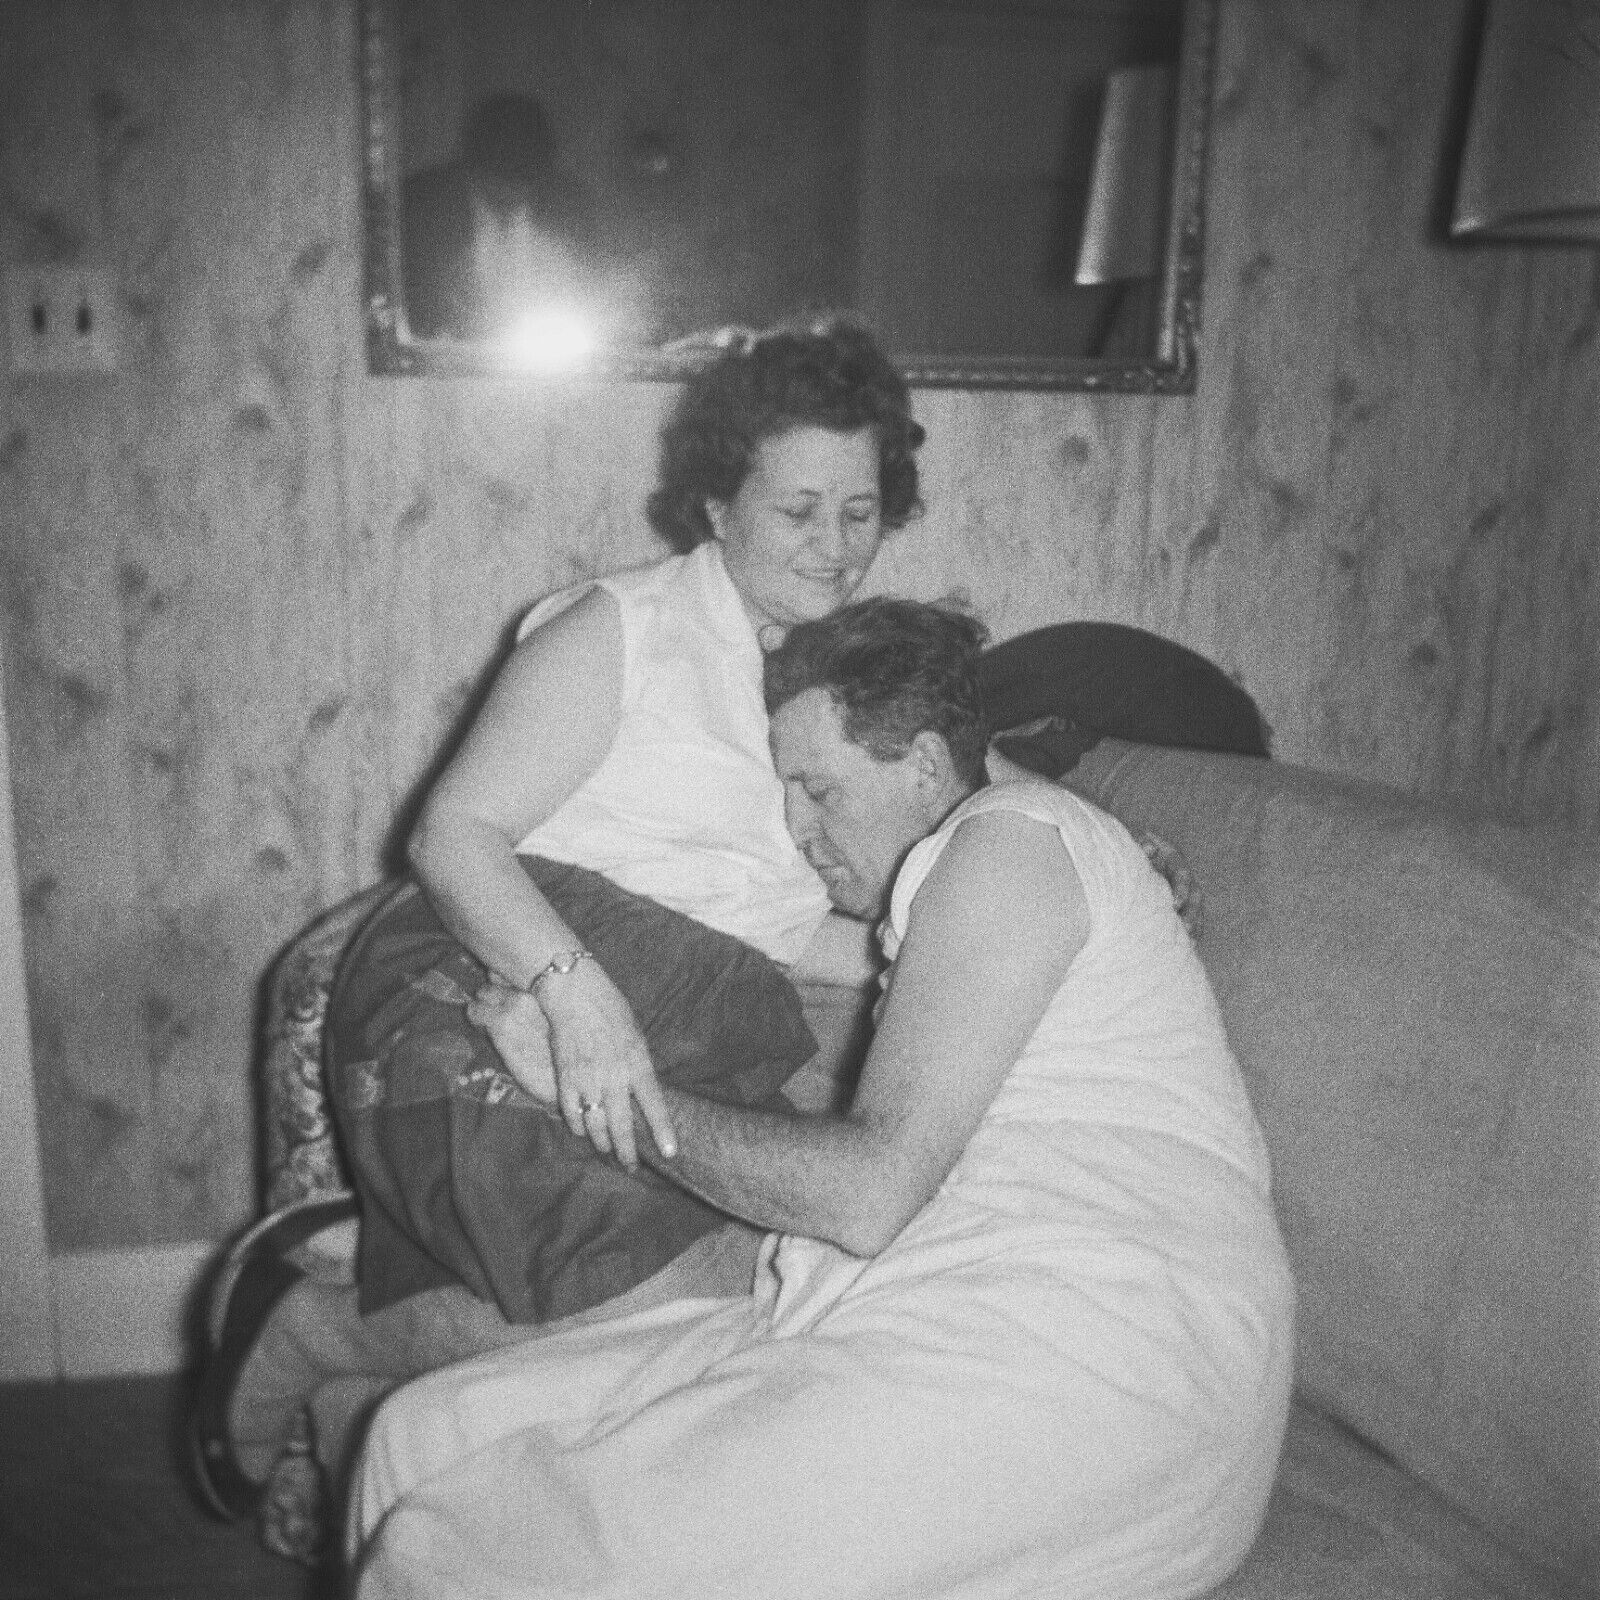 Voyeur Watching Couple Cuddle Photo 1950s Face Buried in Breasts Found Snapshot